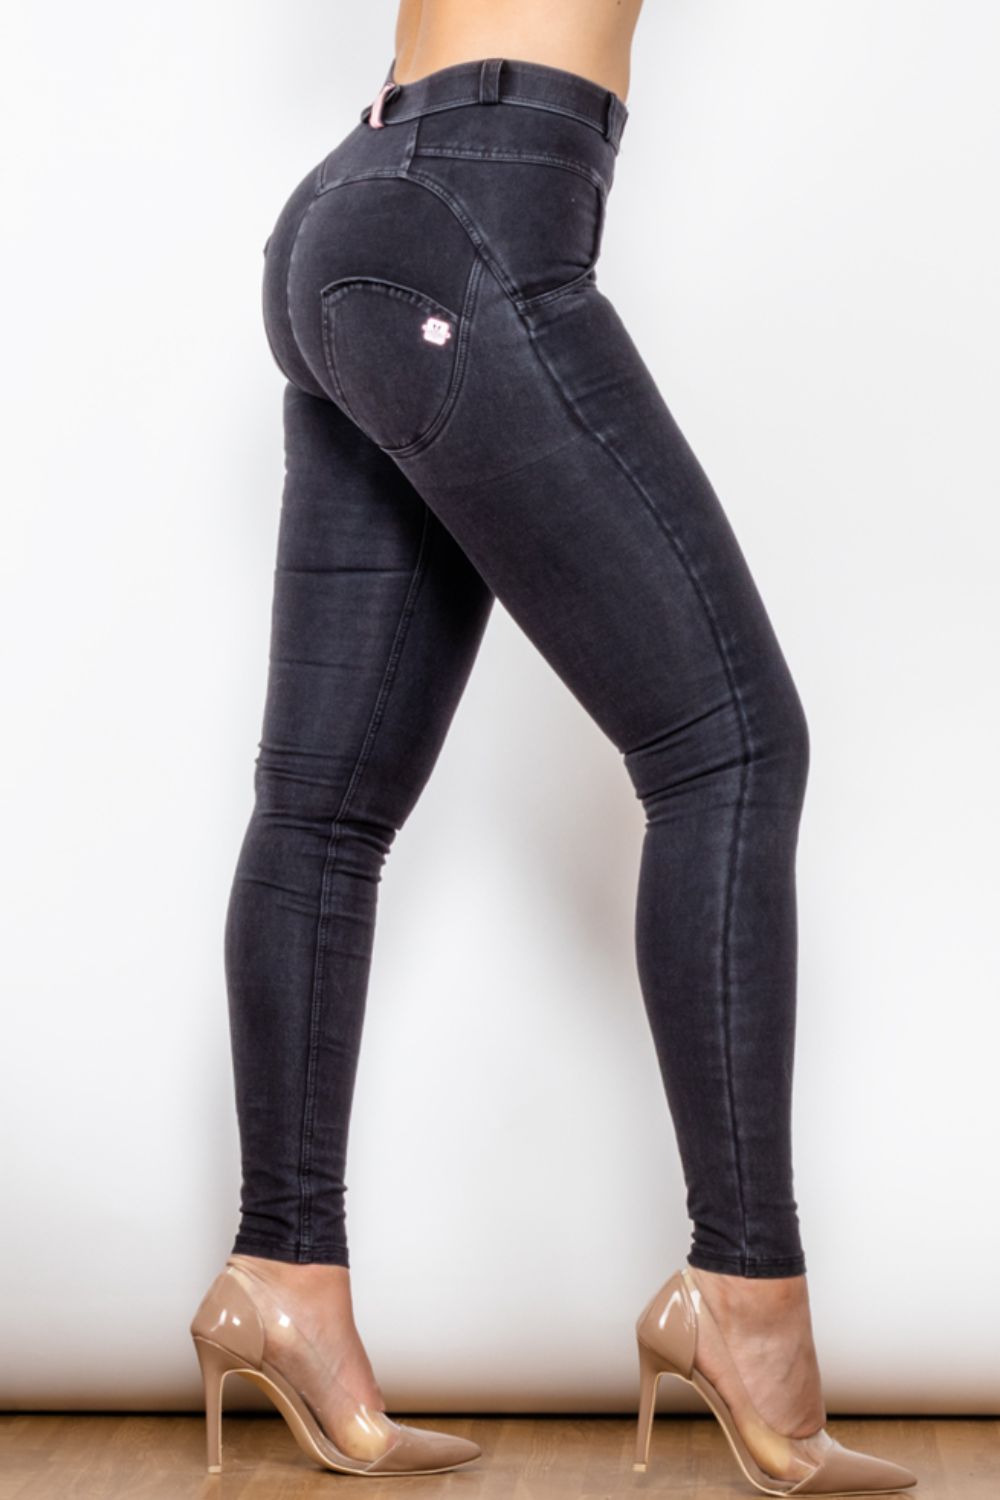 Shimmery Black Skinny Long Jeans - Button Closure